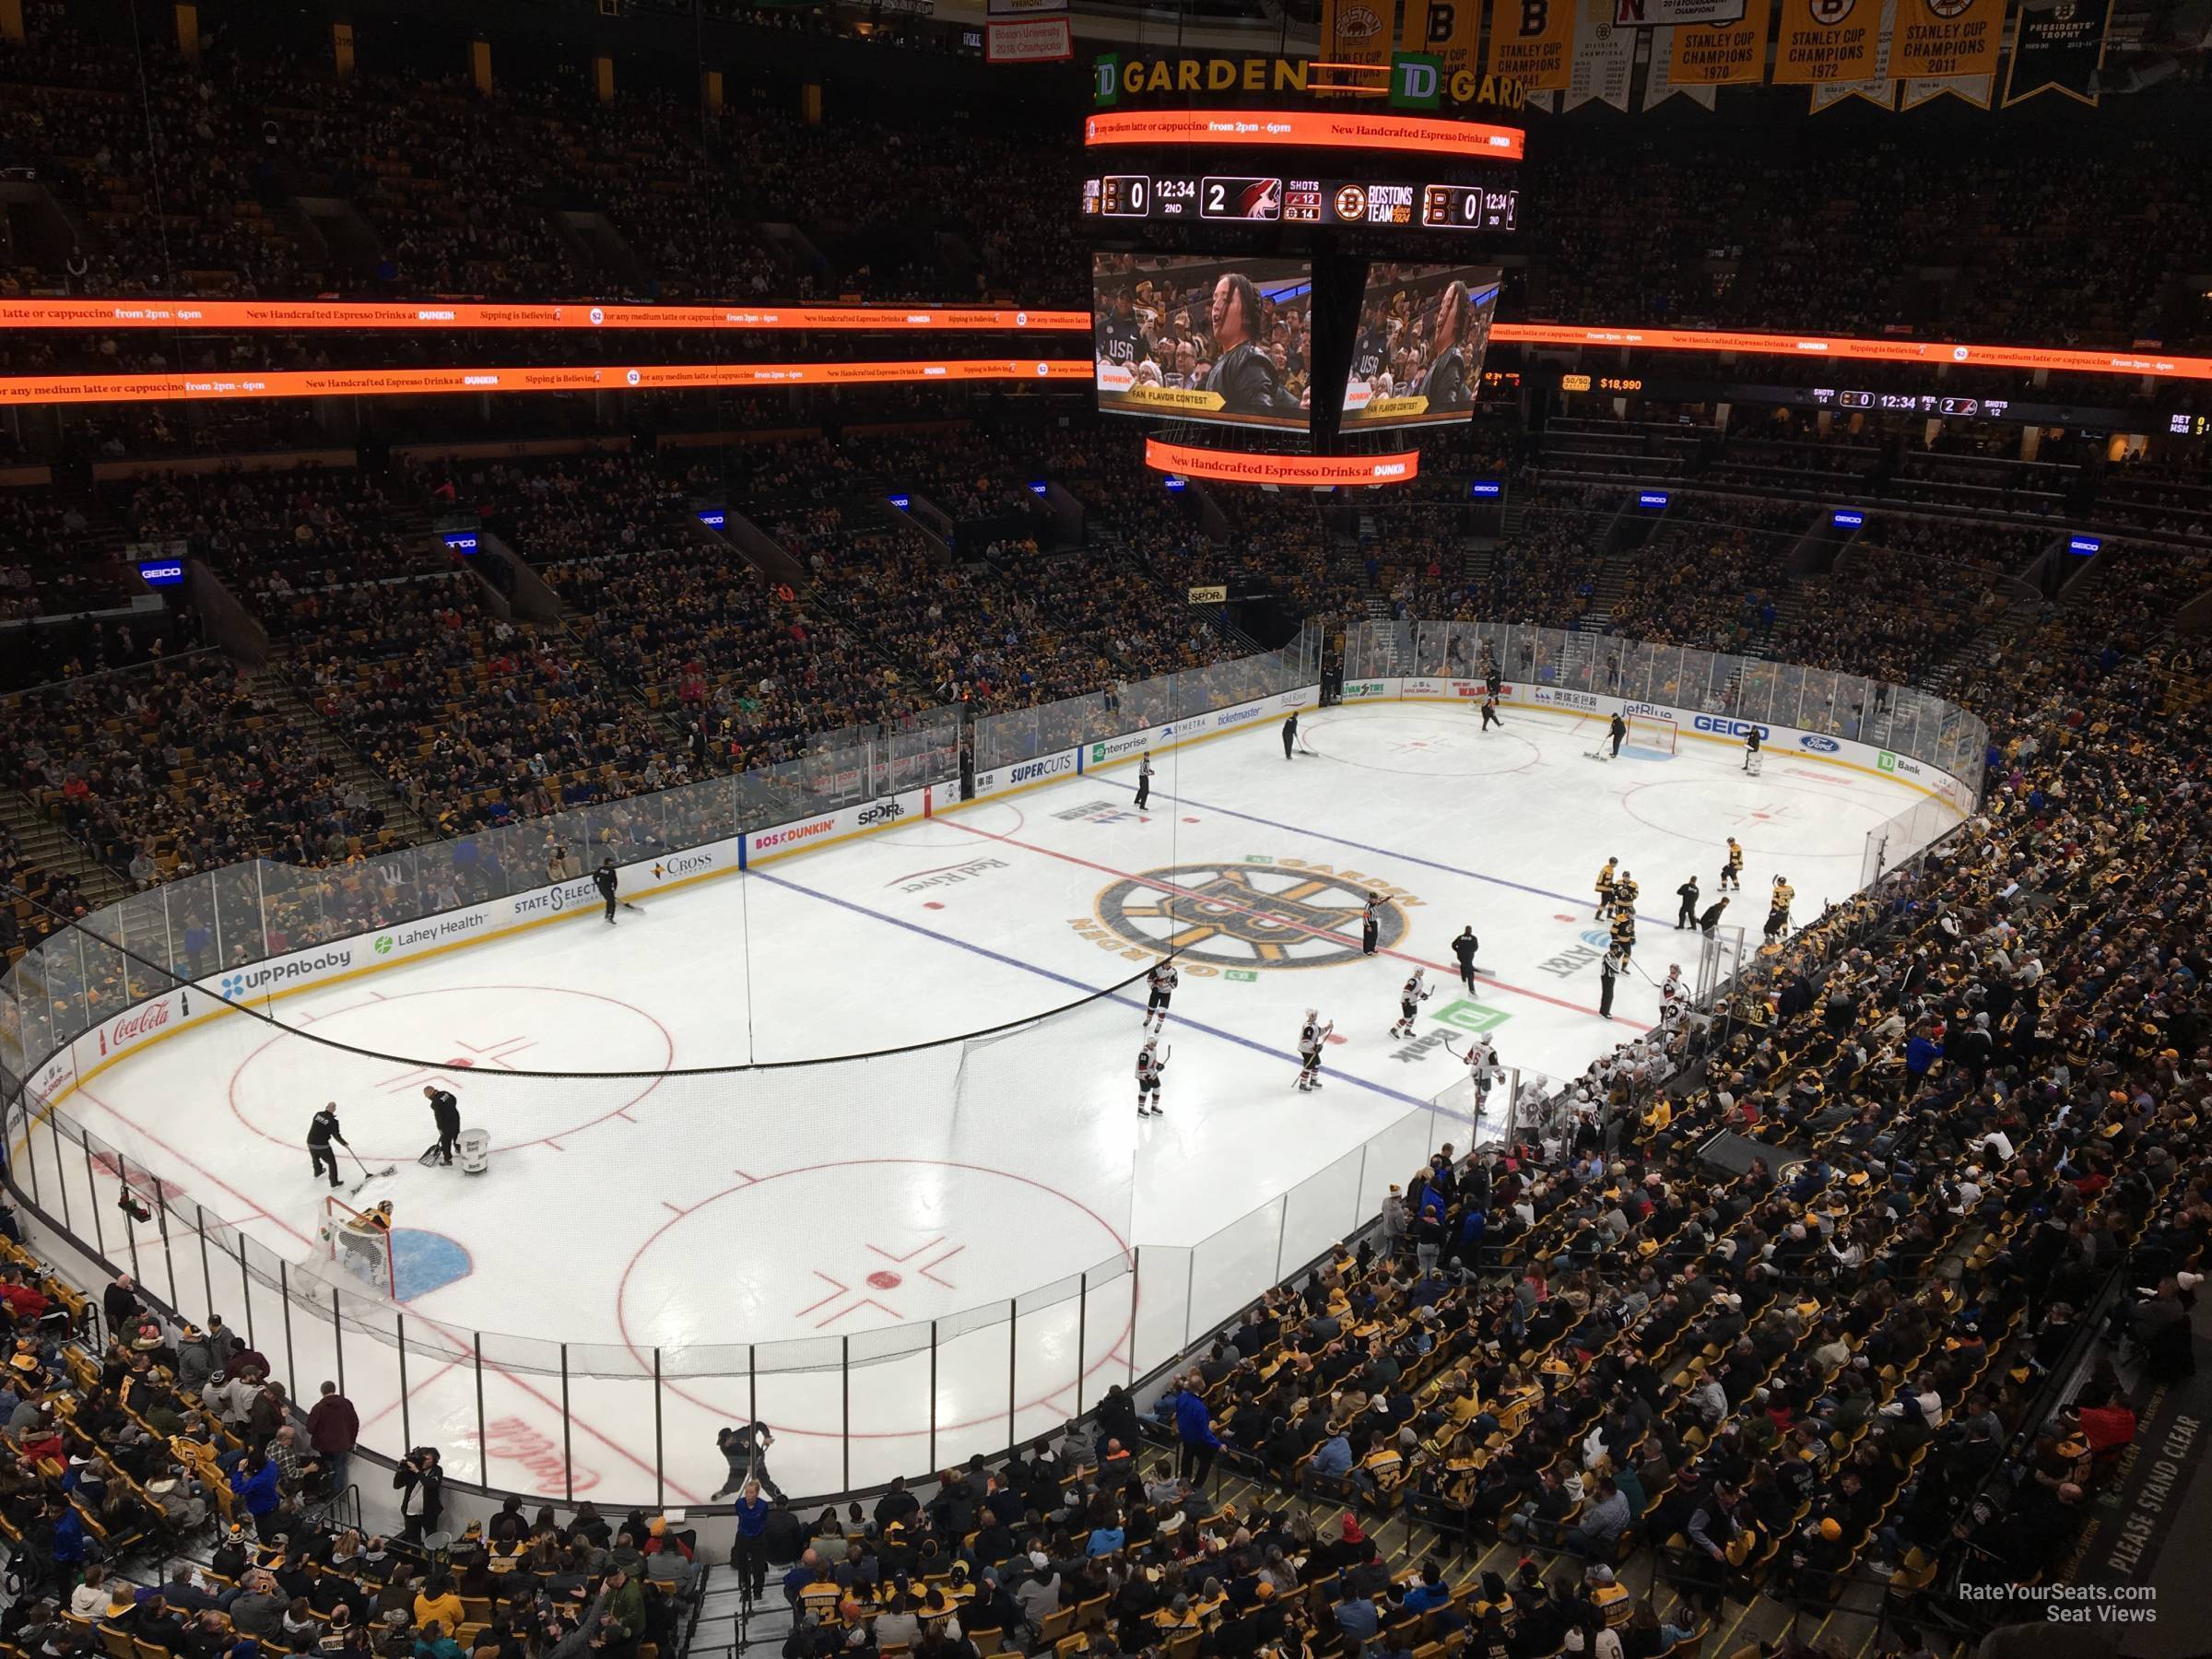 section 305, row 3 seat view  for hockey - td garden